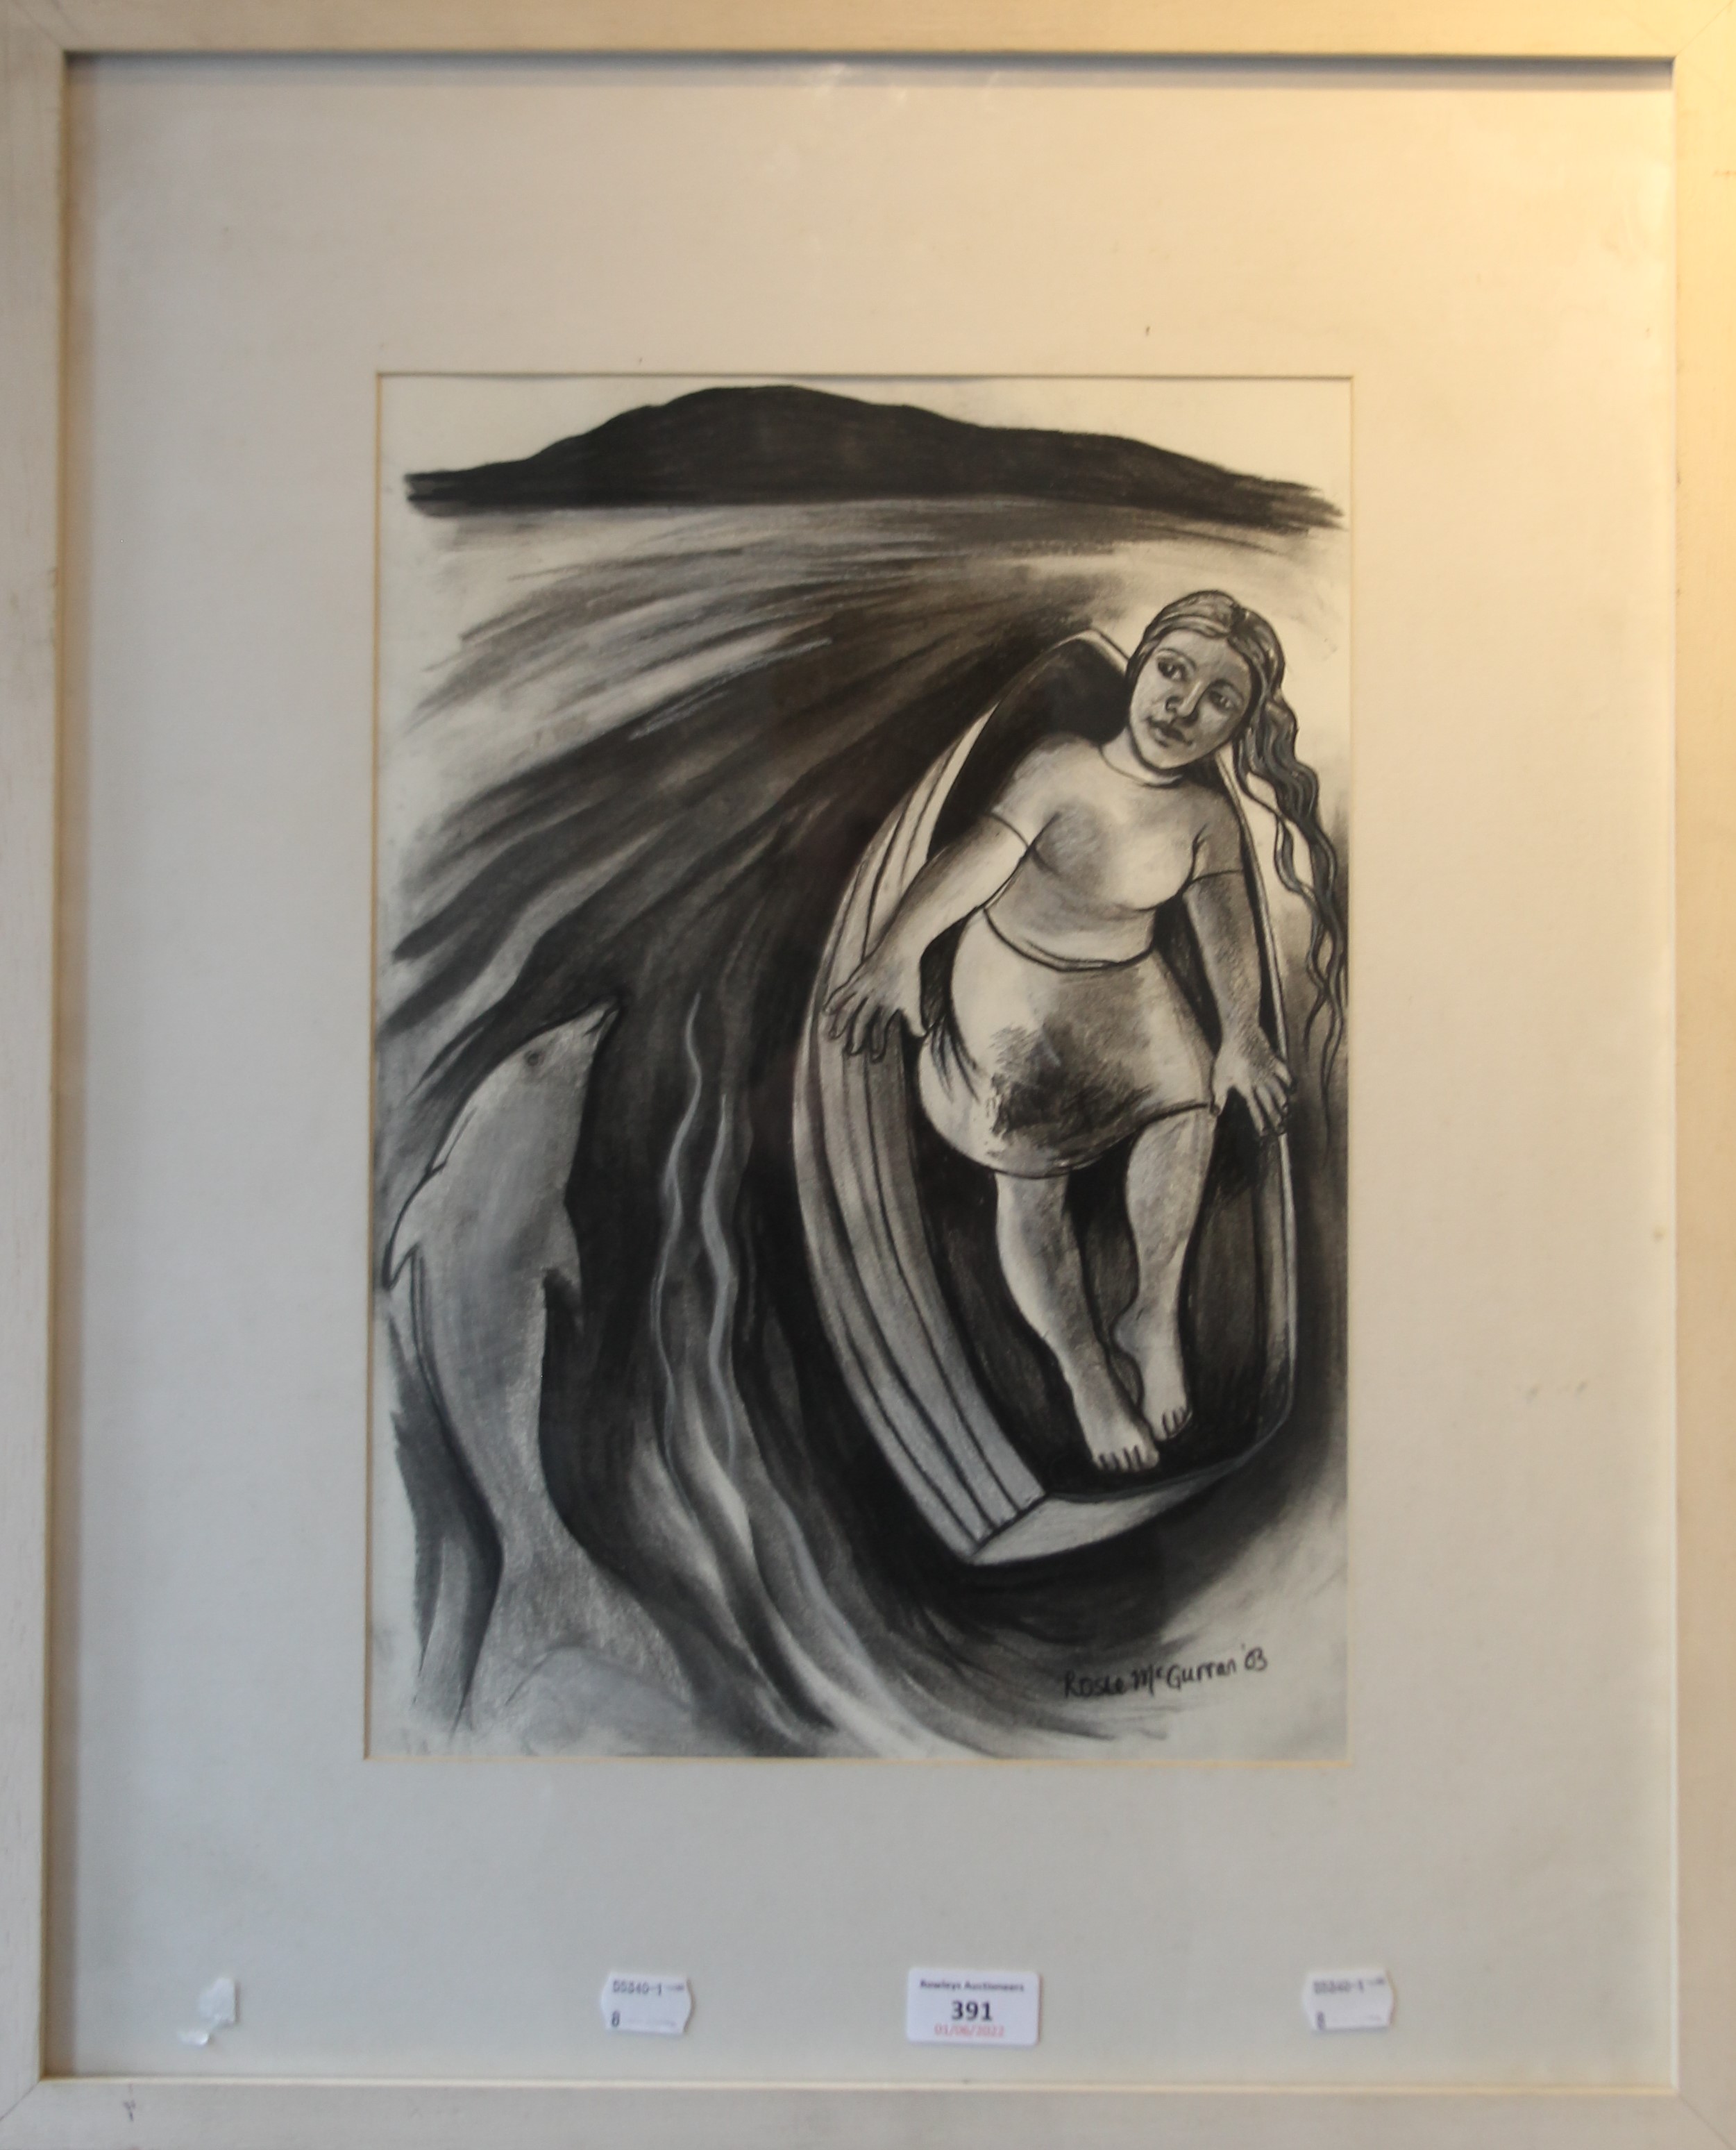 ROSE MCGURRAN (20th/21st century), On the Way to Mac Paras, charcoal, framed and glazed. 29 x 40. - Image 2 of 3